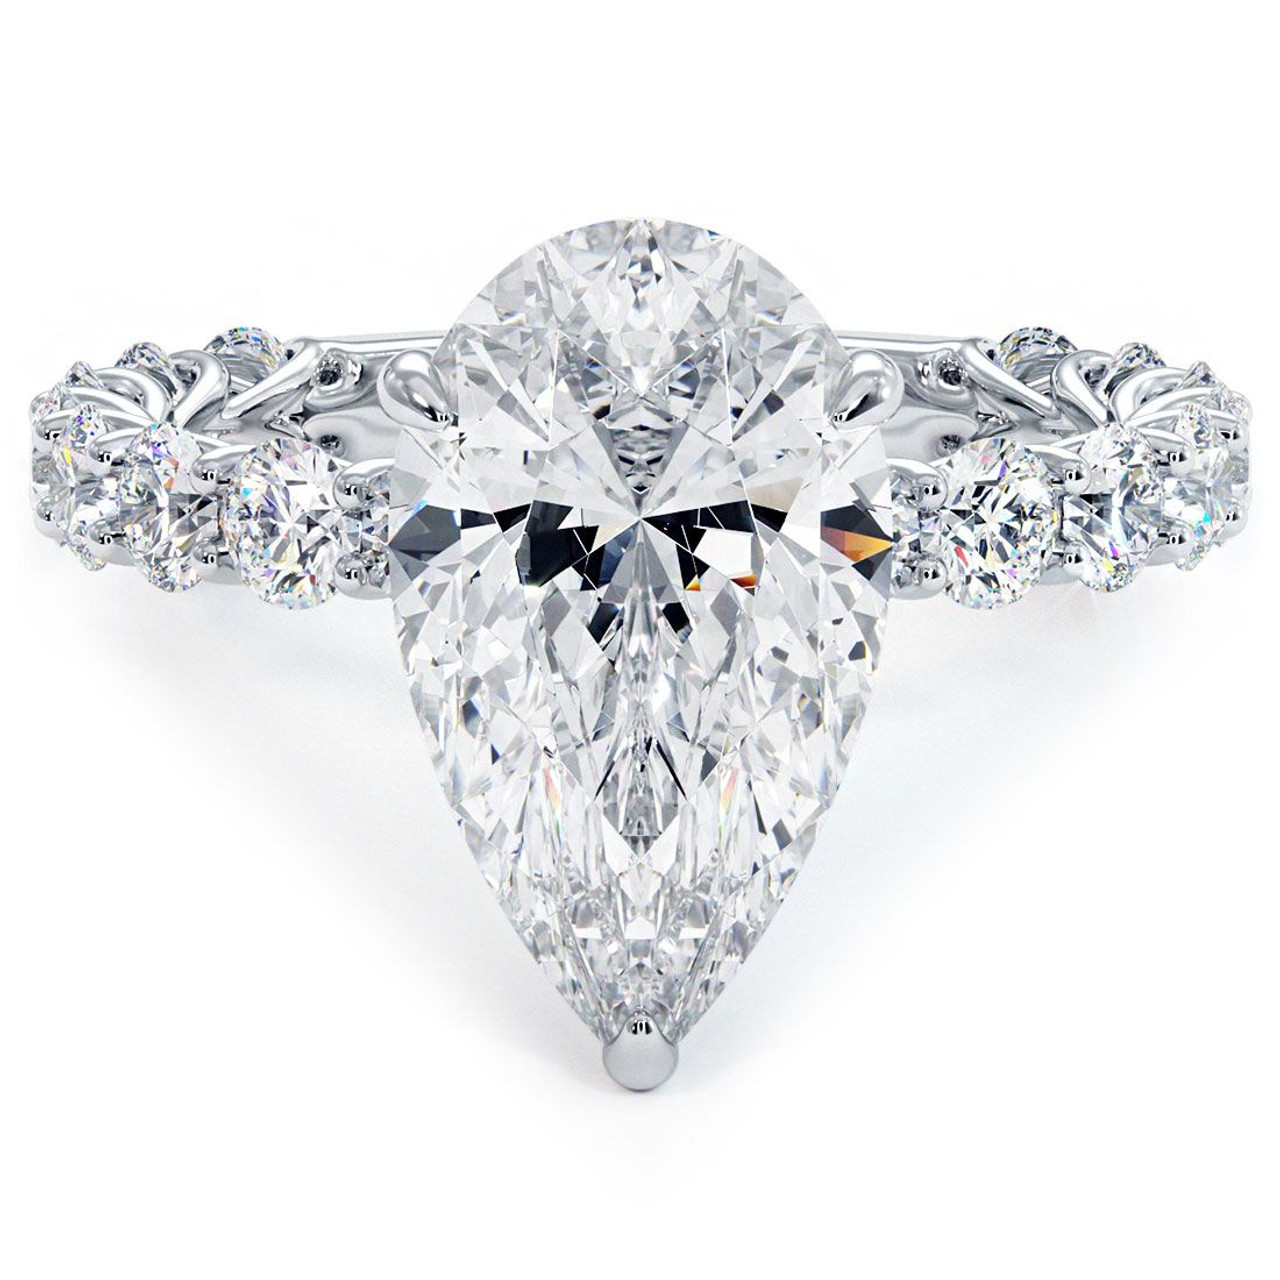 The Perfect Pear Diamond Engagement Ring